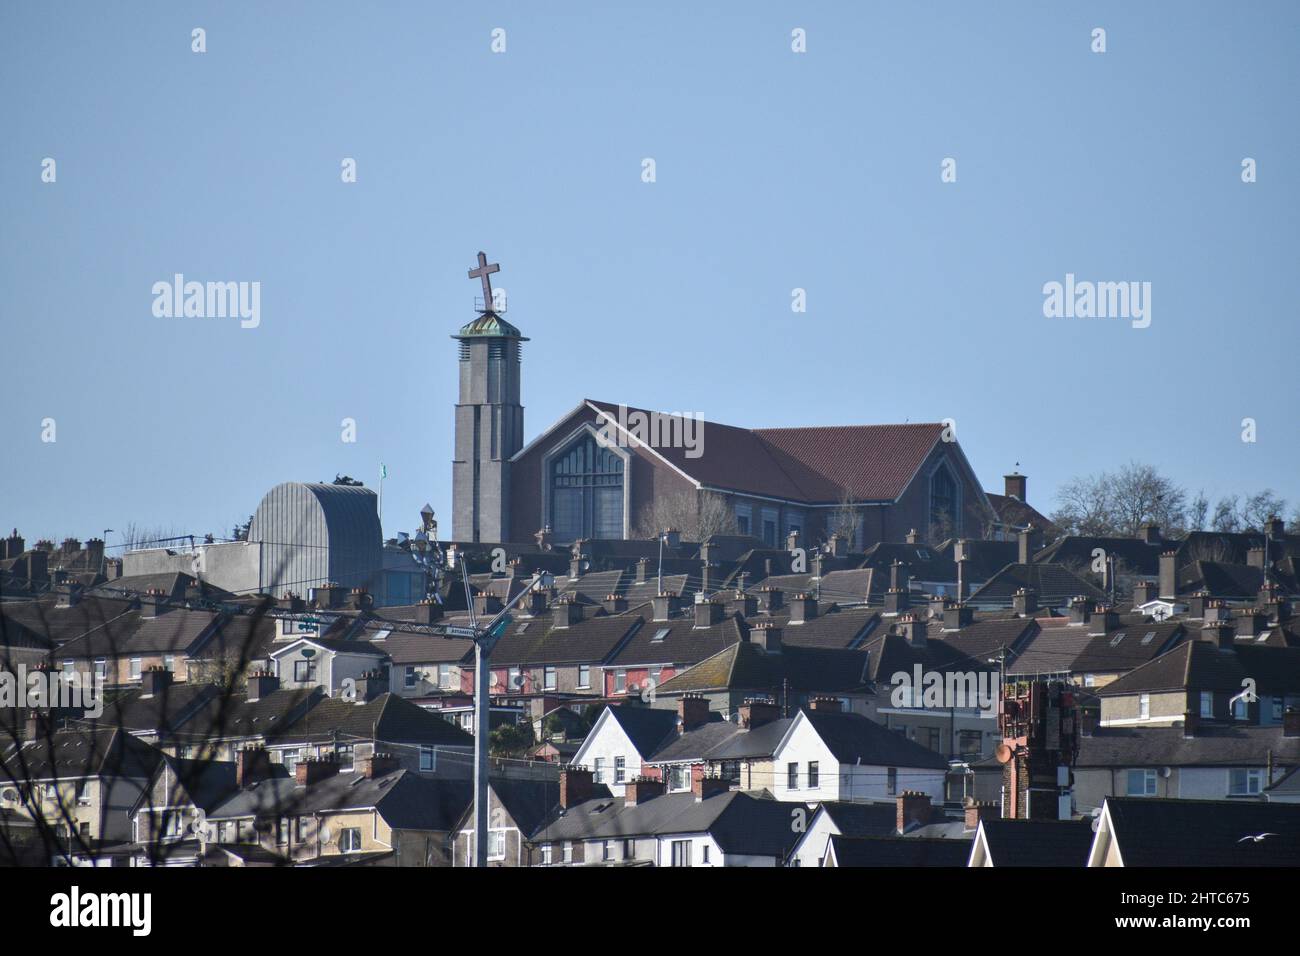 The Cross on the Church of the Ascension has been damaged in Storm Franklin, Cork City. Ireland Stock Photo